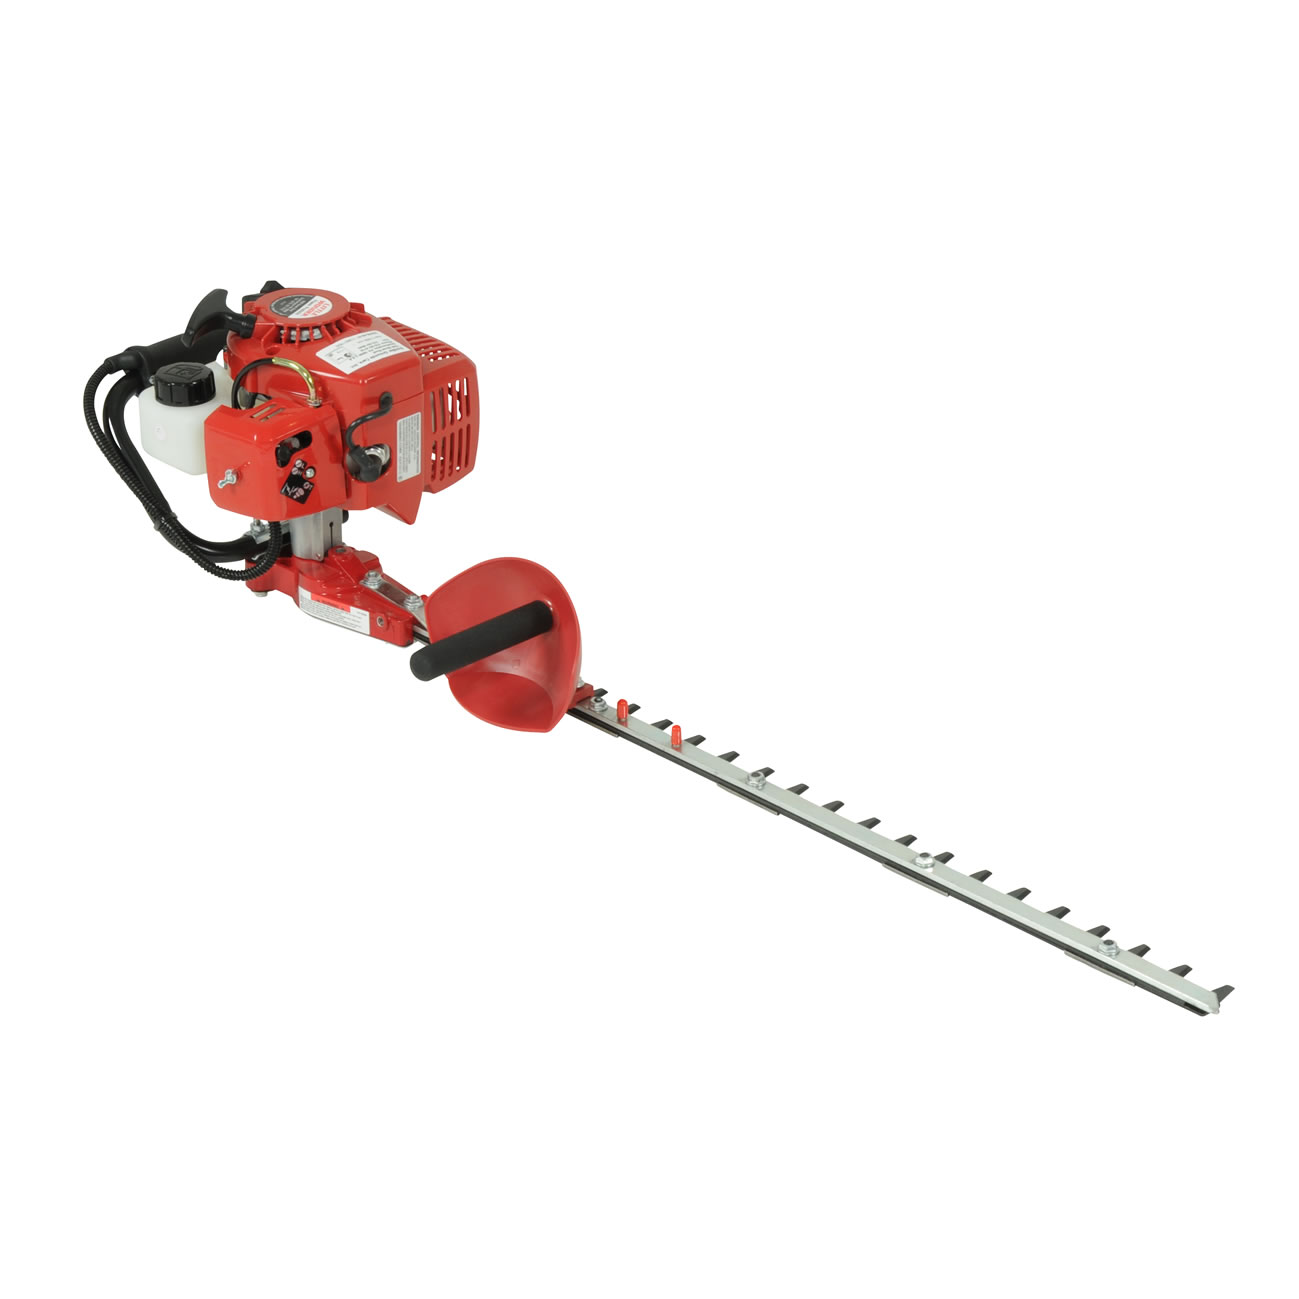 Featured image for “Hedge Trimmer (Electric)”